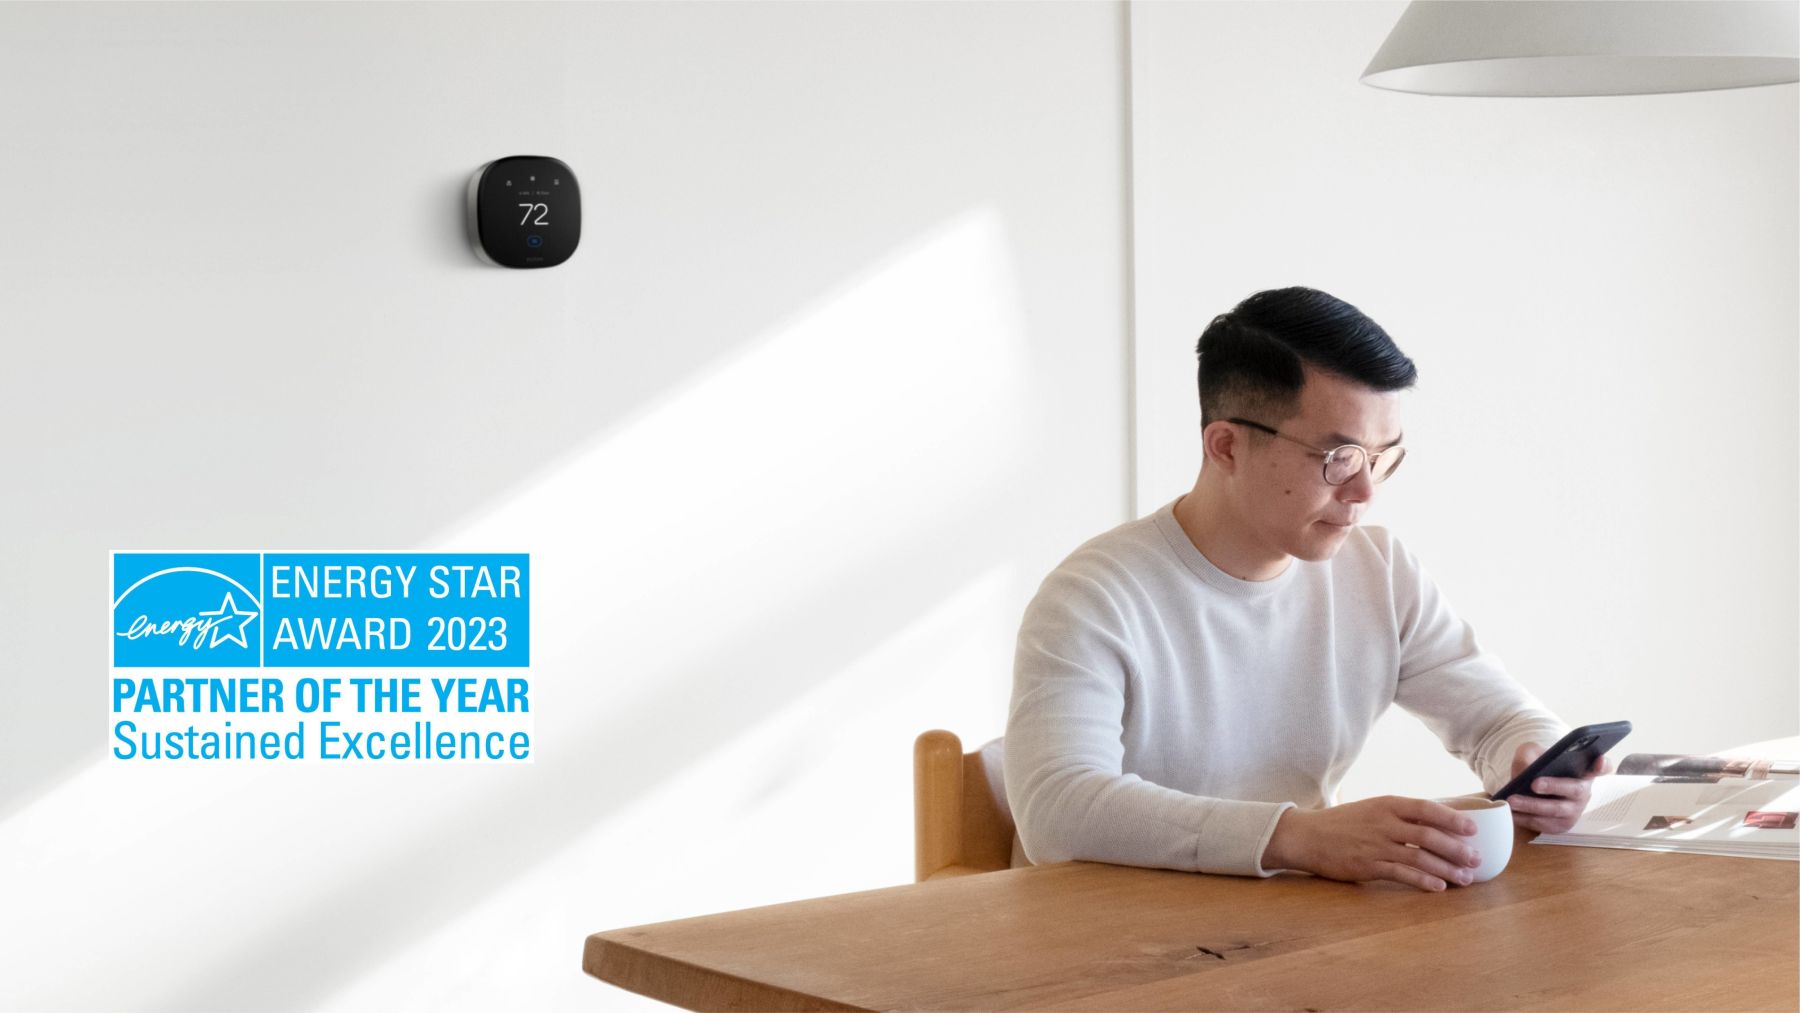 Man sitting at a table with an ecobee thermostat on the wall behind him. ENERGY STAR Partner of the Year logo in the bottom corner.